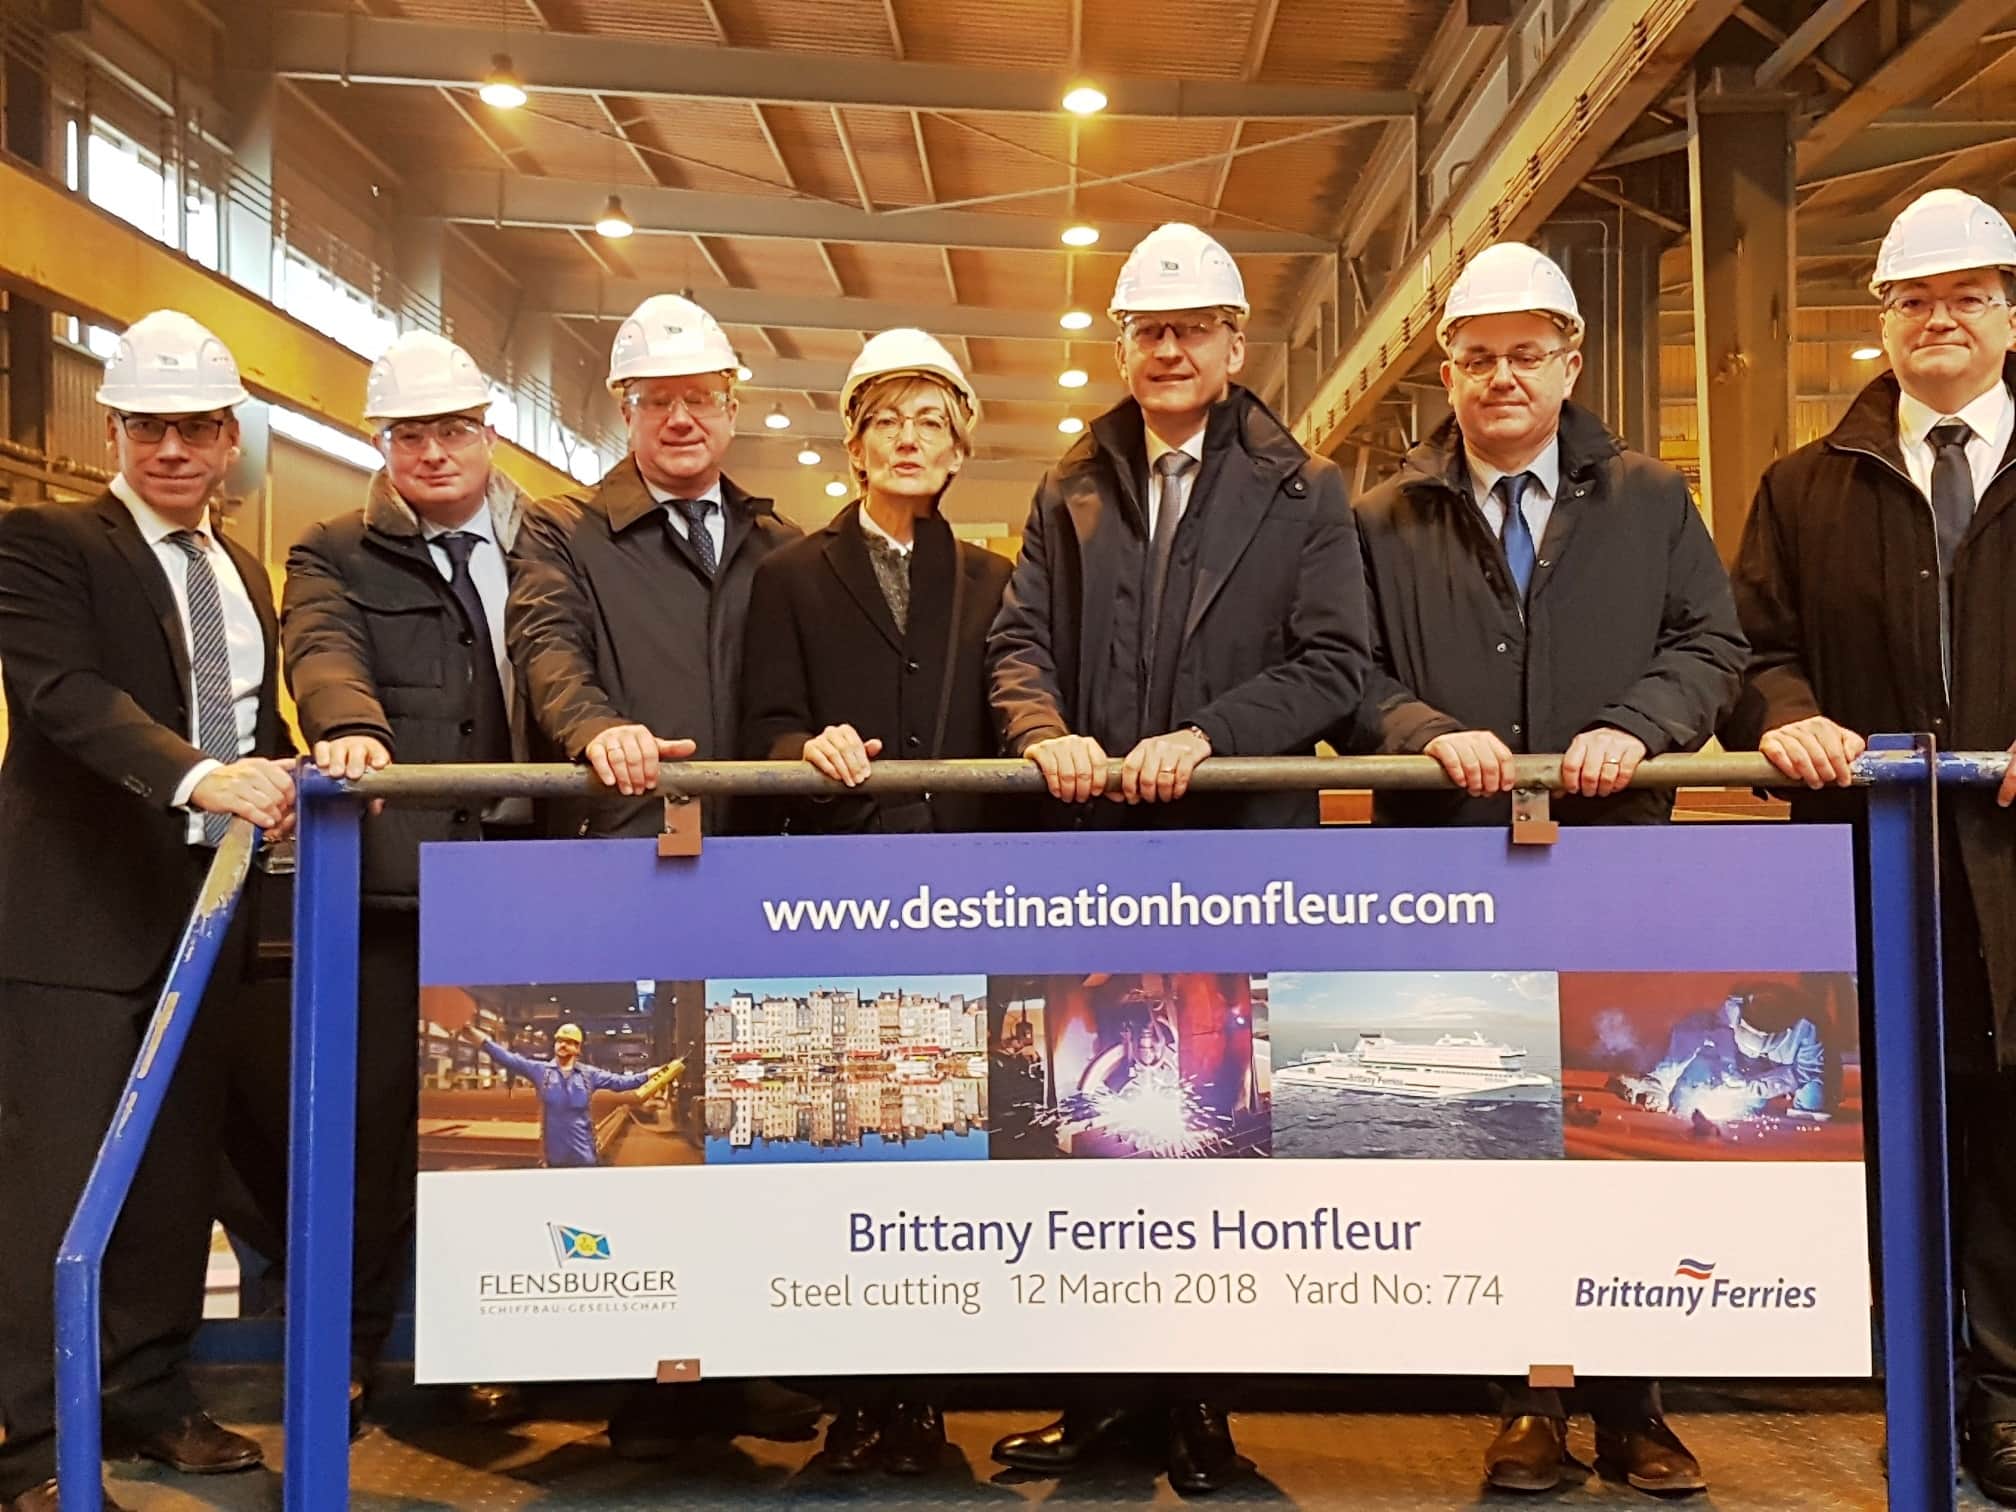 The steel cutting ceremony for HONFLEUR, 12th March 2018. From L-R: Dirk Hemsen, Project Manager FSG; Arnaud Le Poulichet, Technical Director, Brittany Ferries; Rüdiger Fuchs, CEO, FSG; Corinne Vintner, Legal Director, Brittany Ferries; Christophe Mathieu, CEO, Brittany Ferries; Frédéric Pouget, Fleet, maritime and port operation Director Brittany Ferries; Brice Robinson, Naval Projects Manager, Brittany Ferries. Brittany Ferries